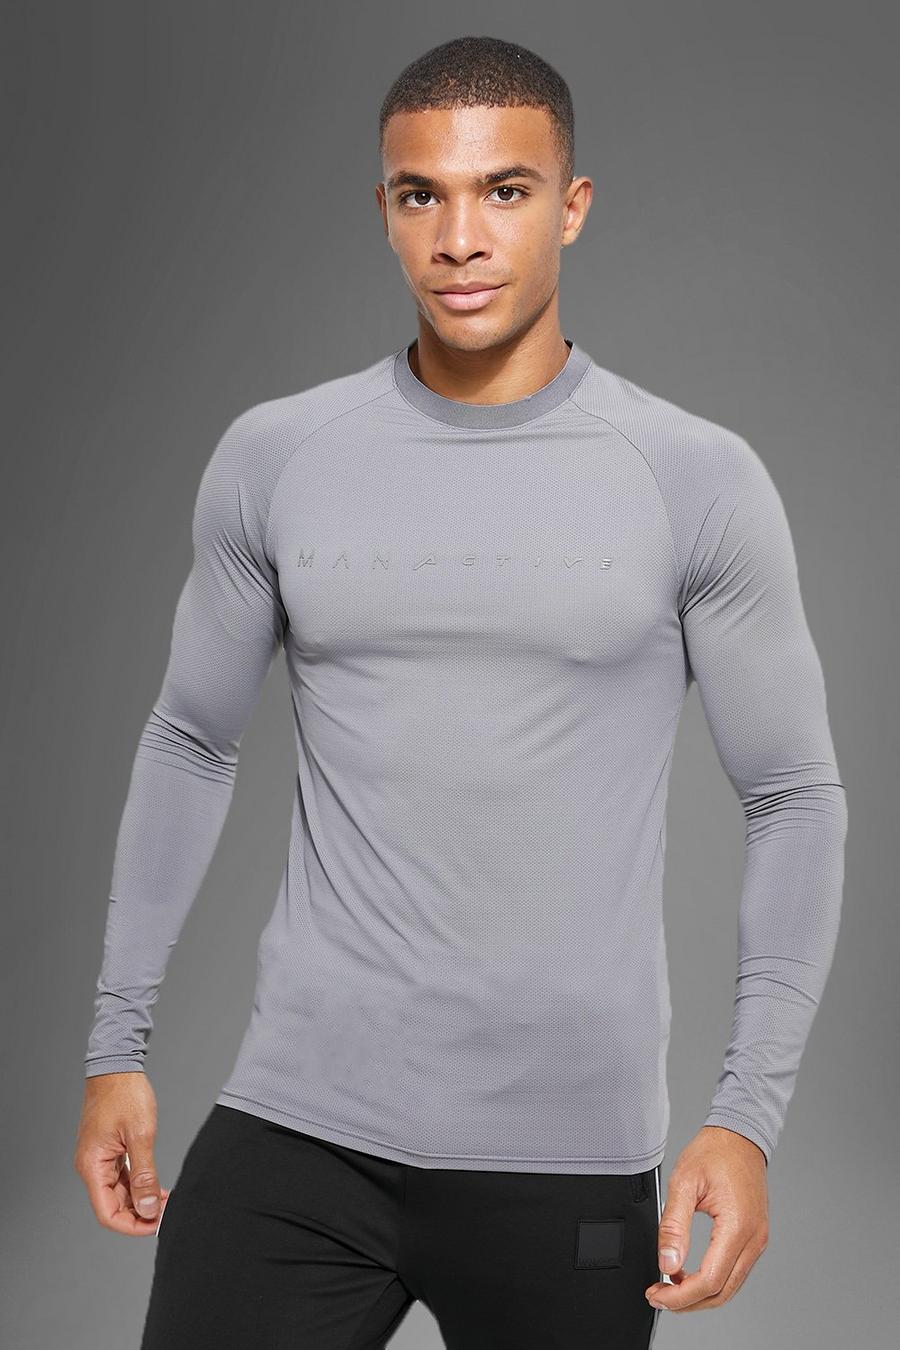 Charcoal grey Active Gym Performance Tech Long Sleeve Top image number 1